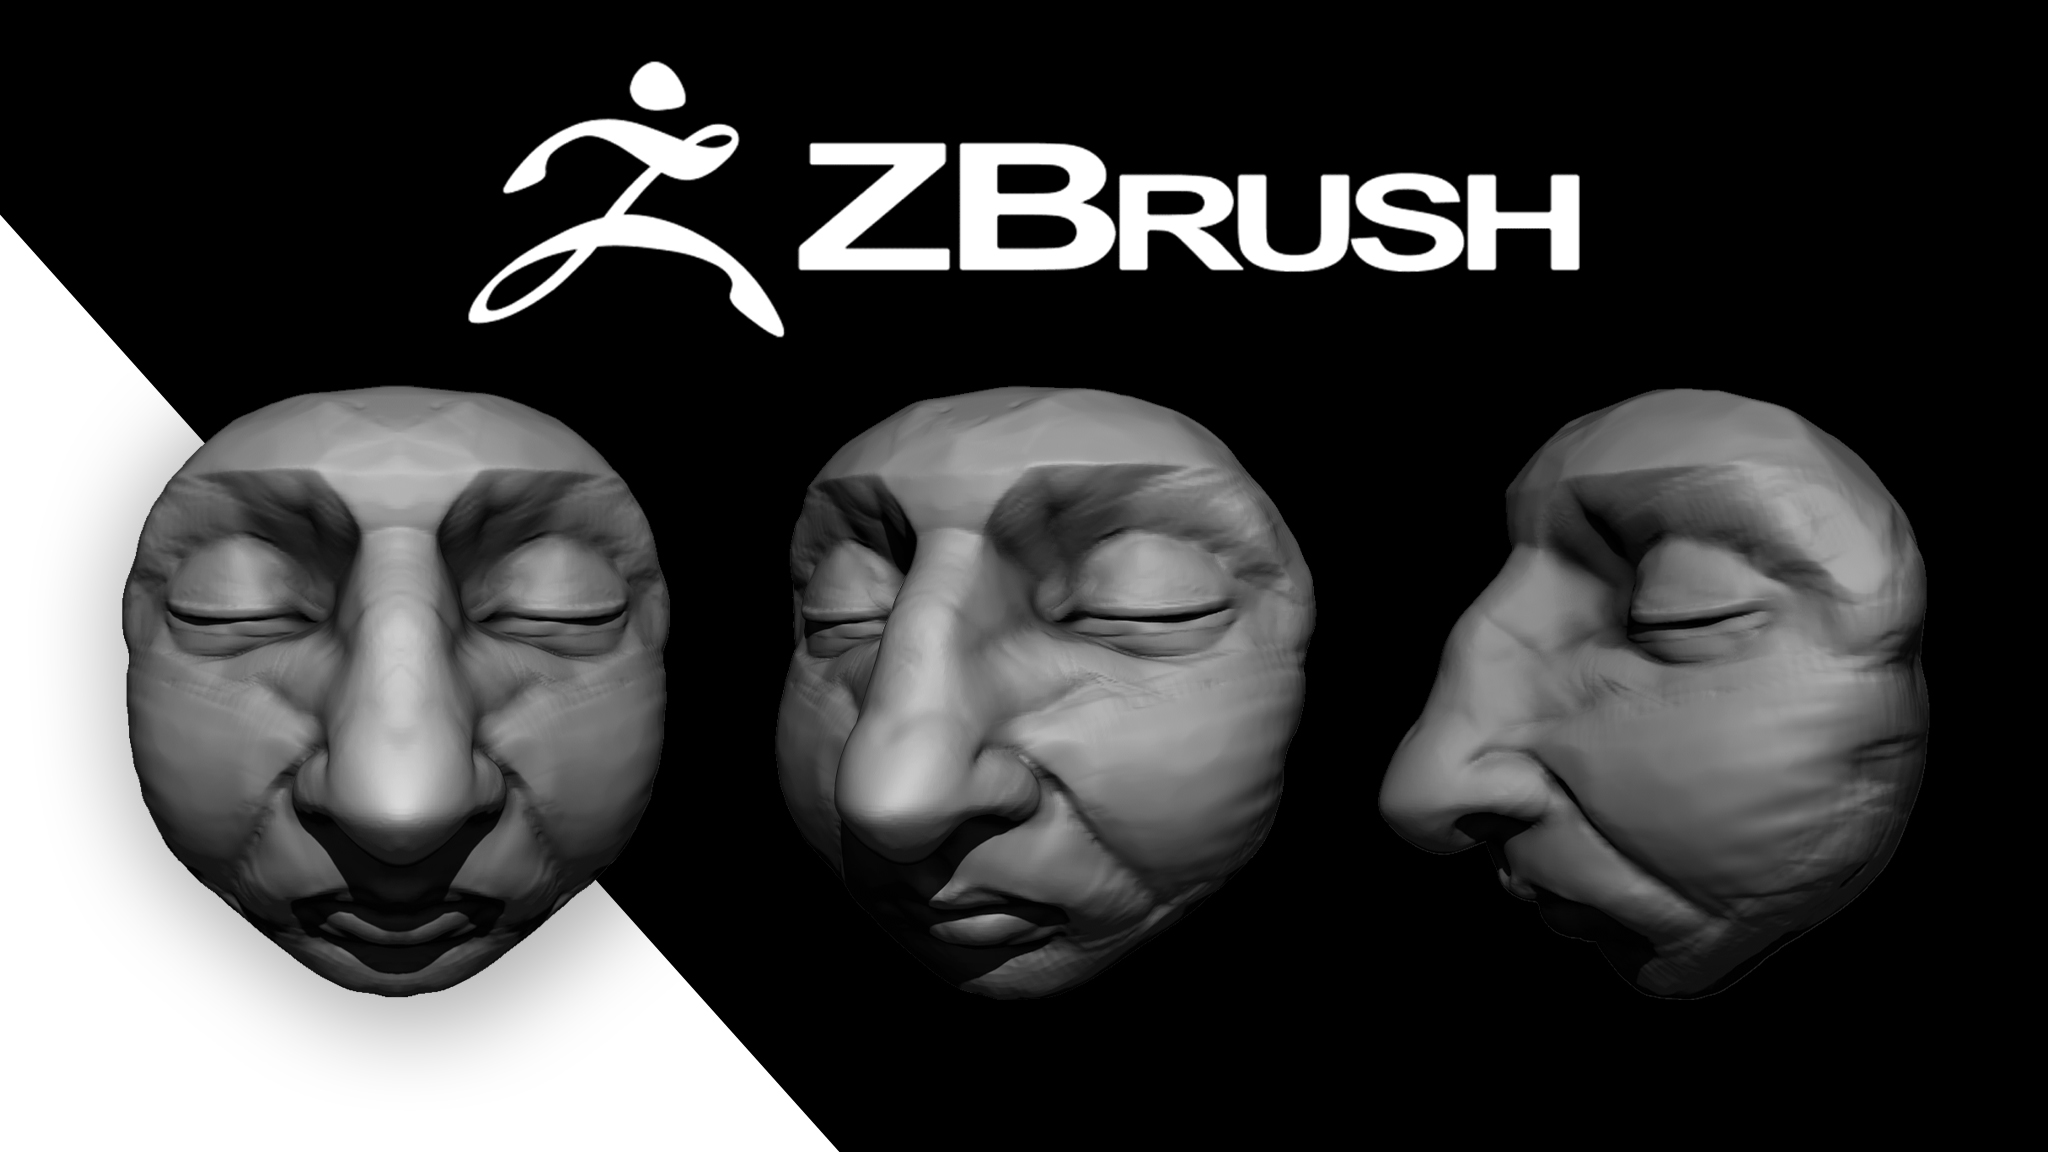 how to get zbrush as a student